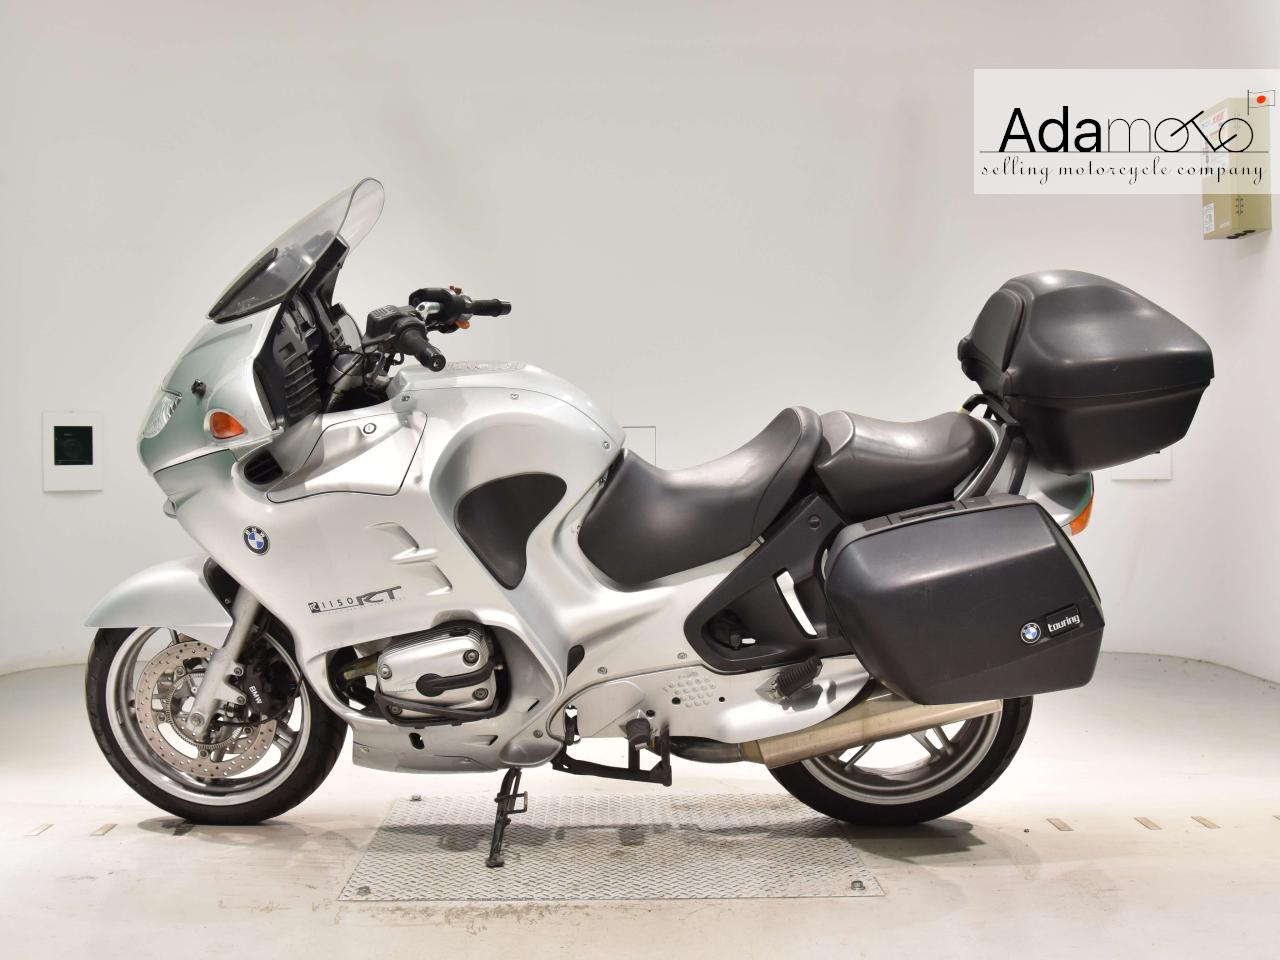 BMW R1150RT - Adamoto - Motorcycles from Japan